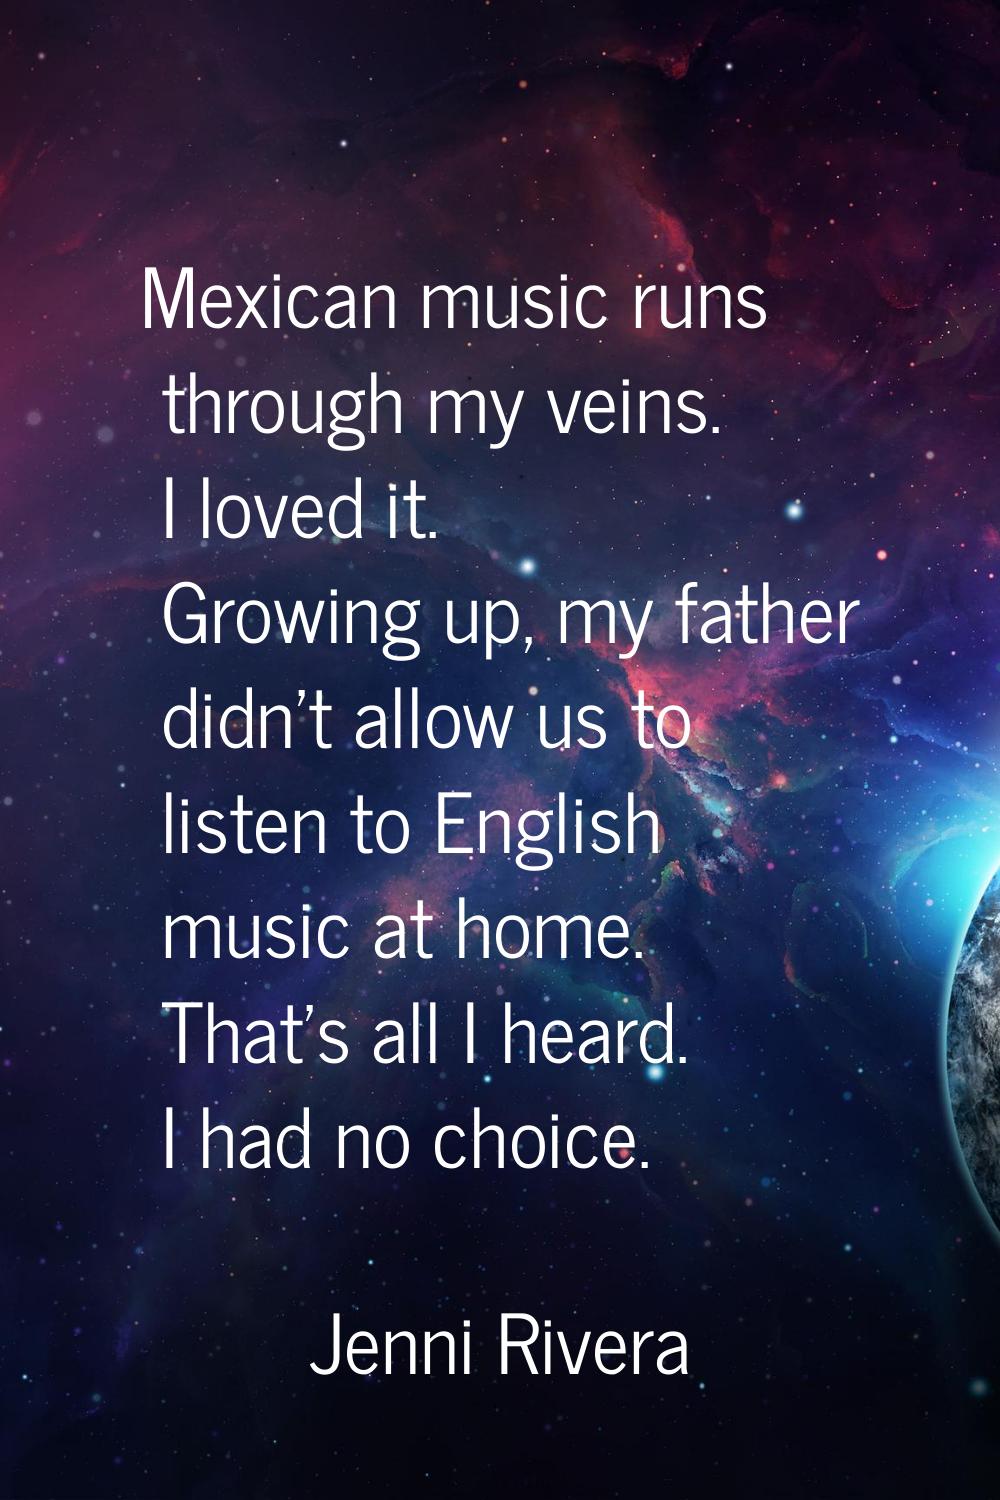 Mexican music runs through my veins. I loved it. Growing up, my father didn't allow us to listen to